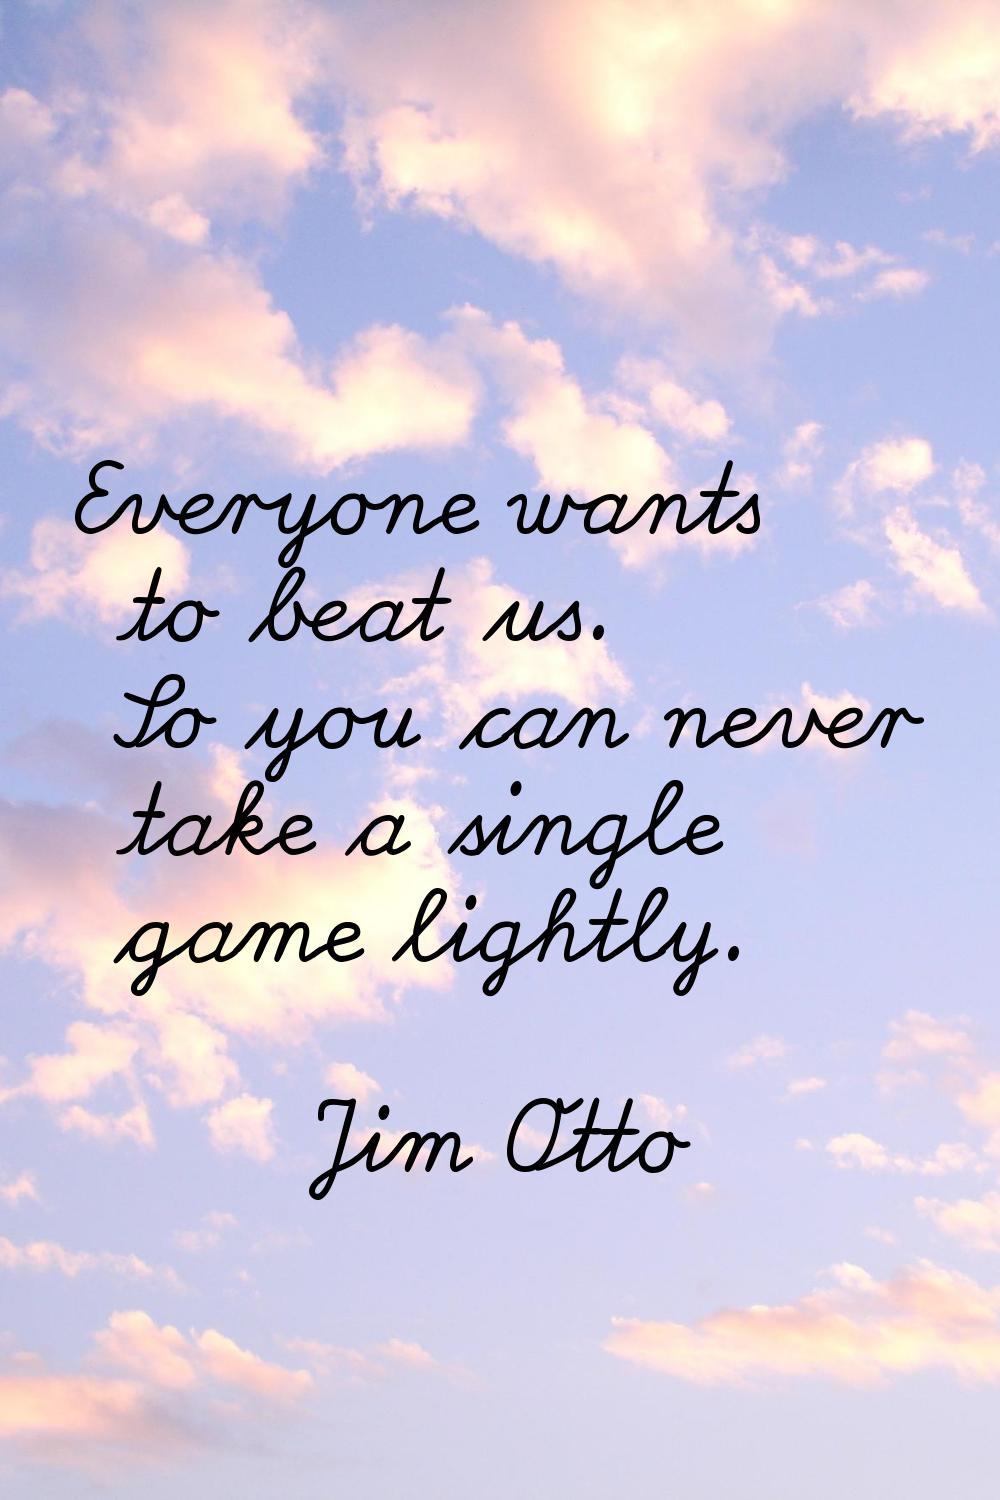 Everyone wants to beat us. So you can never take a single game lightly.